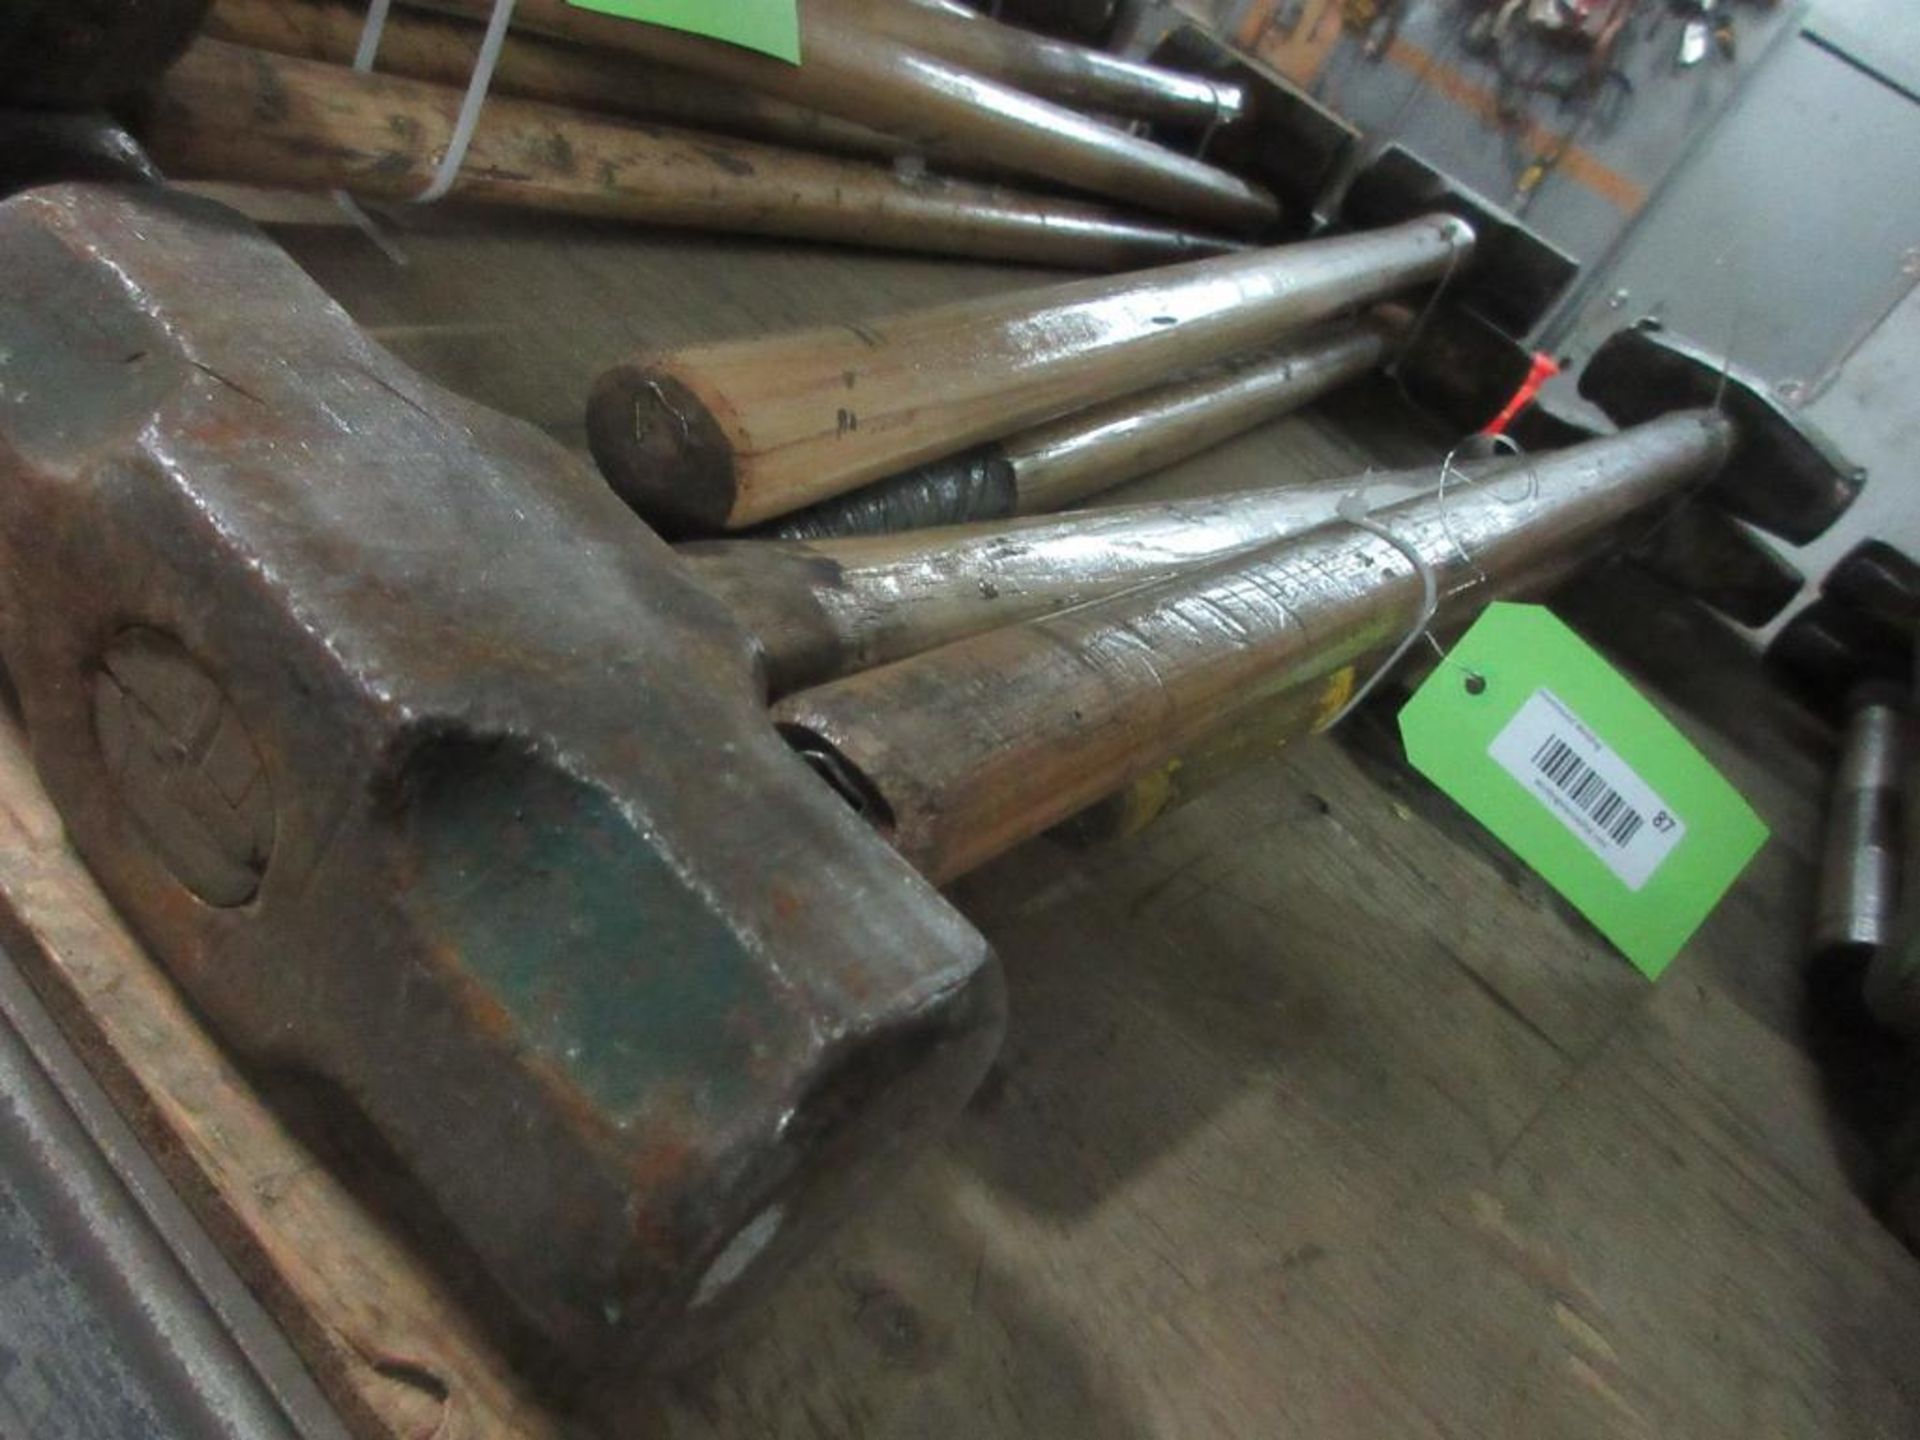 LOT OF (5) APPROX 8-10LB SLEDGE HAMMERS (IN CENTRAL TOOL CRIB)